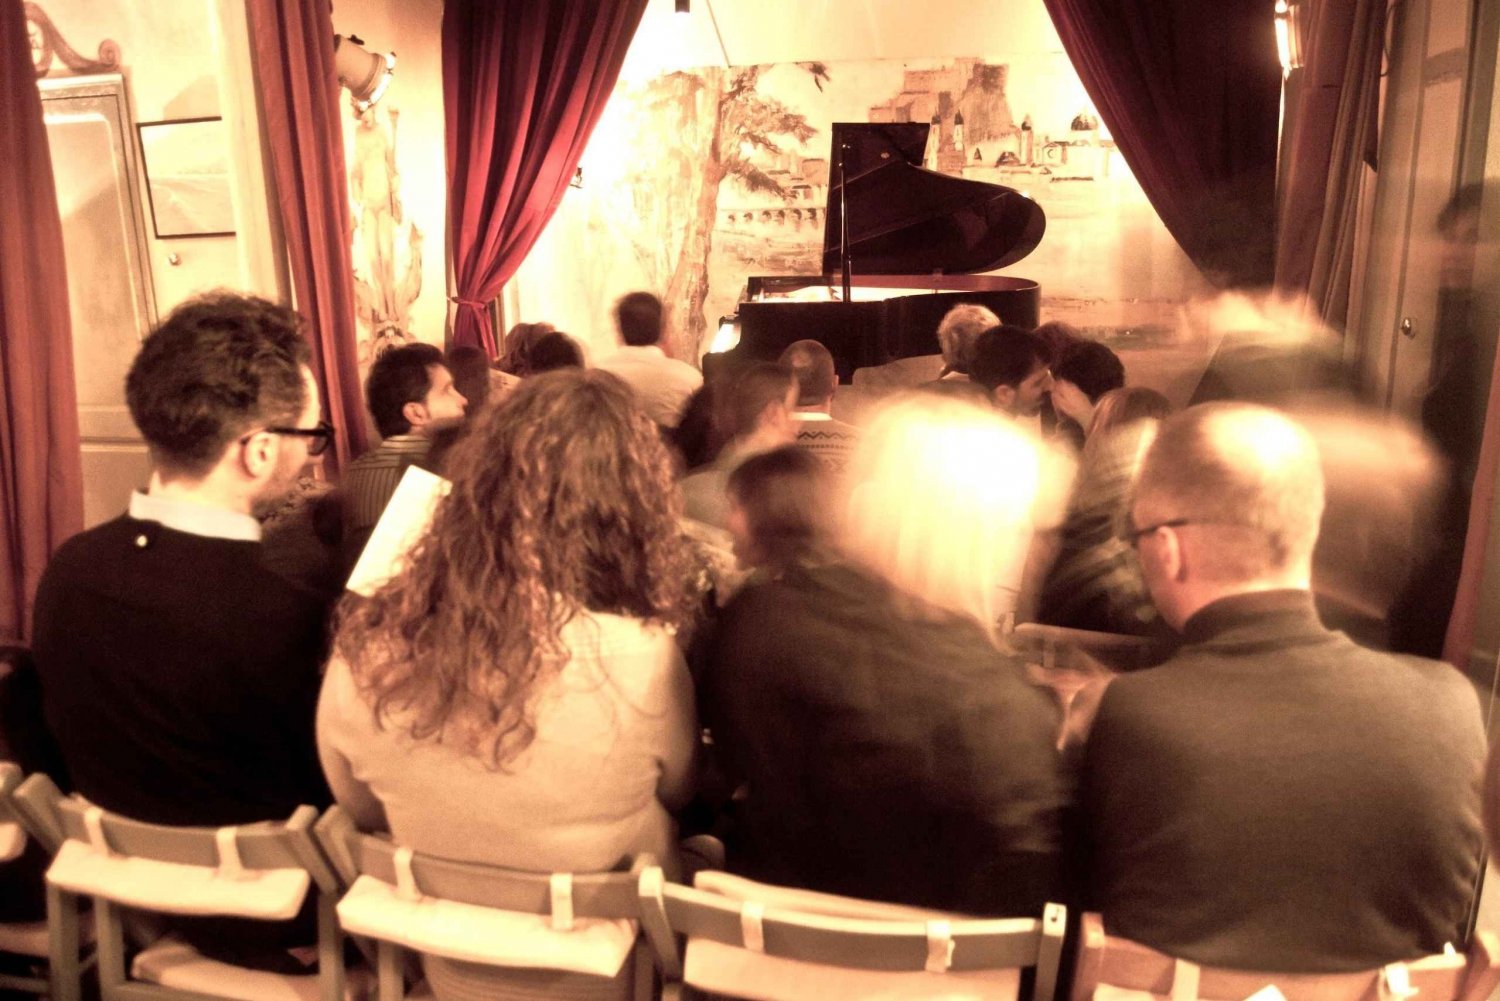 Only Chopín: Exquisite Piano evenings in Barcelona